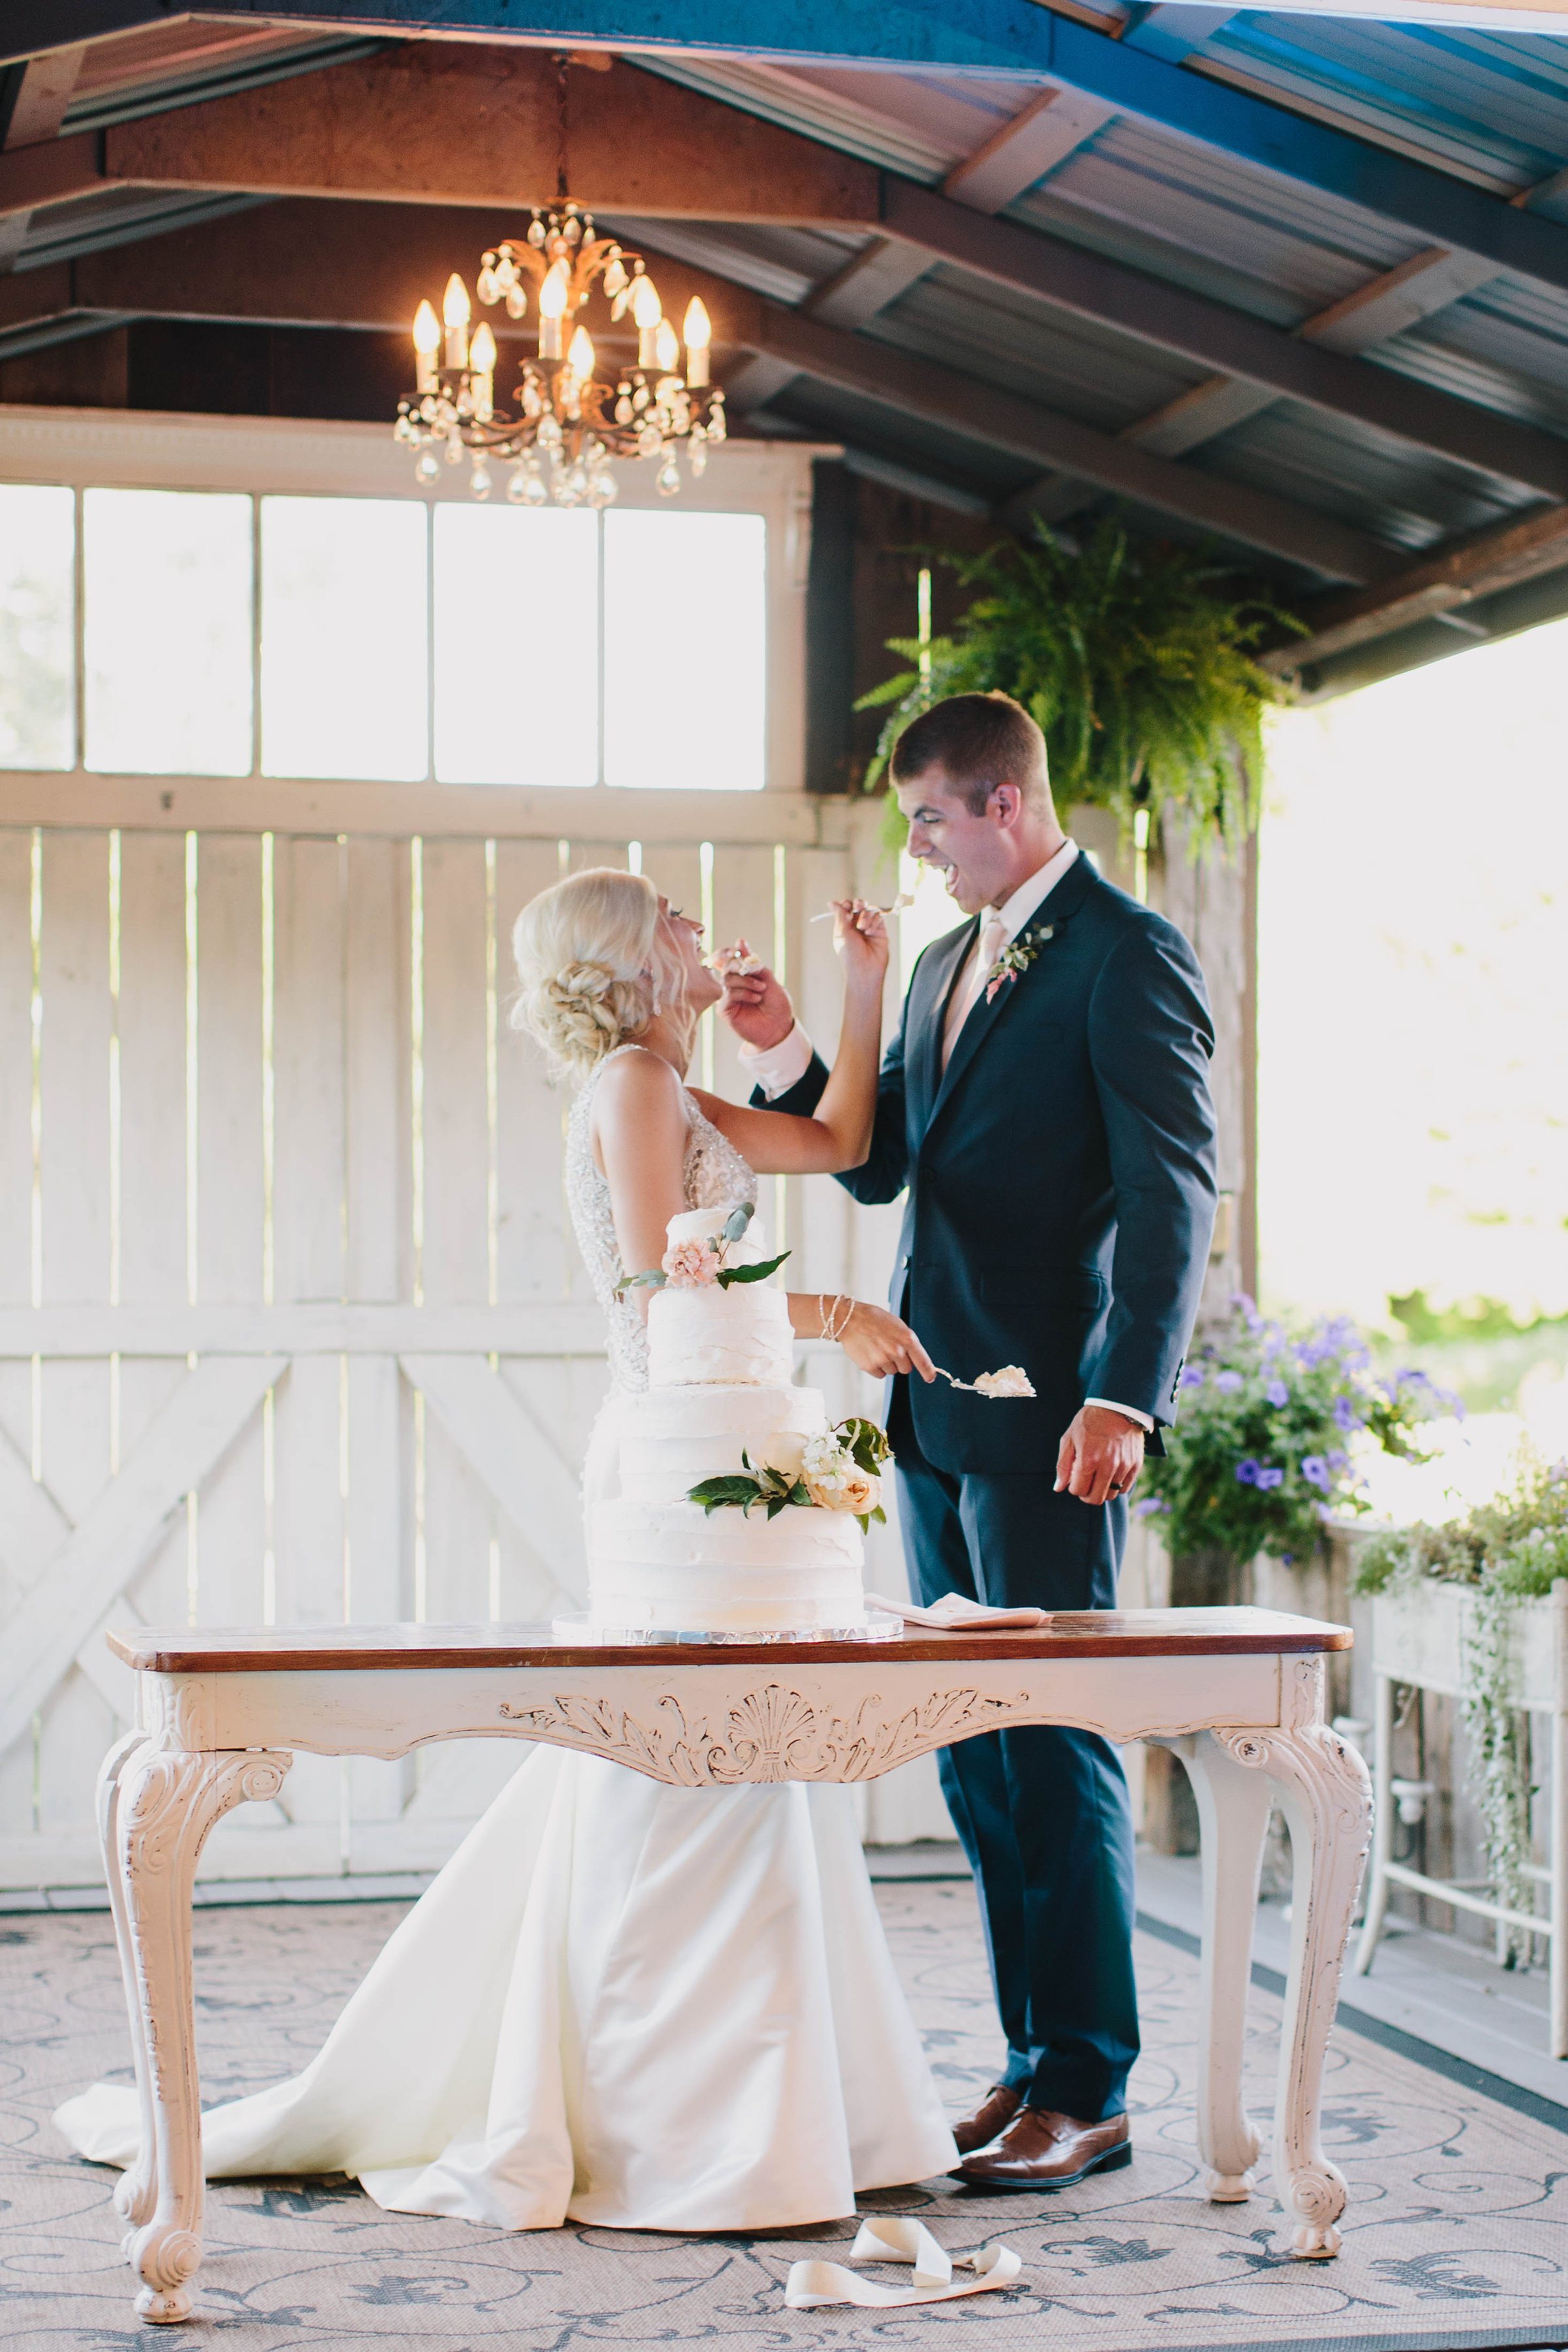 Wedding at Monterey Valley | The Day's Design | Katie Grace Photography